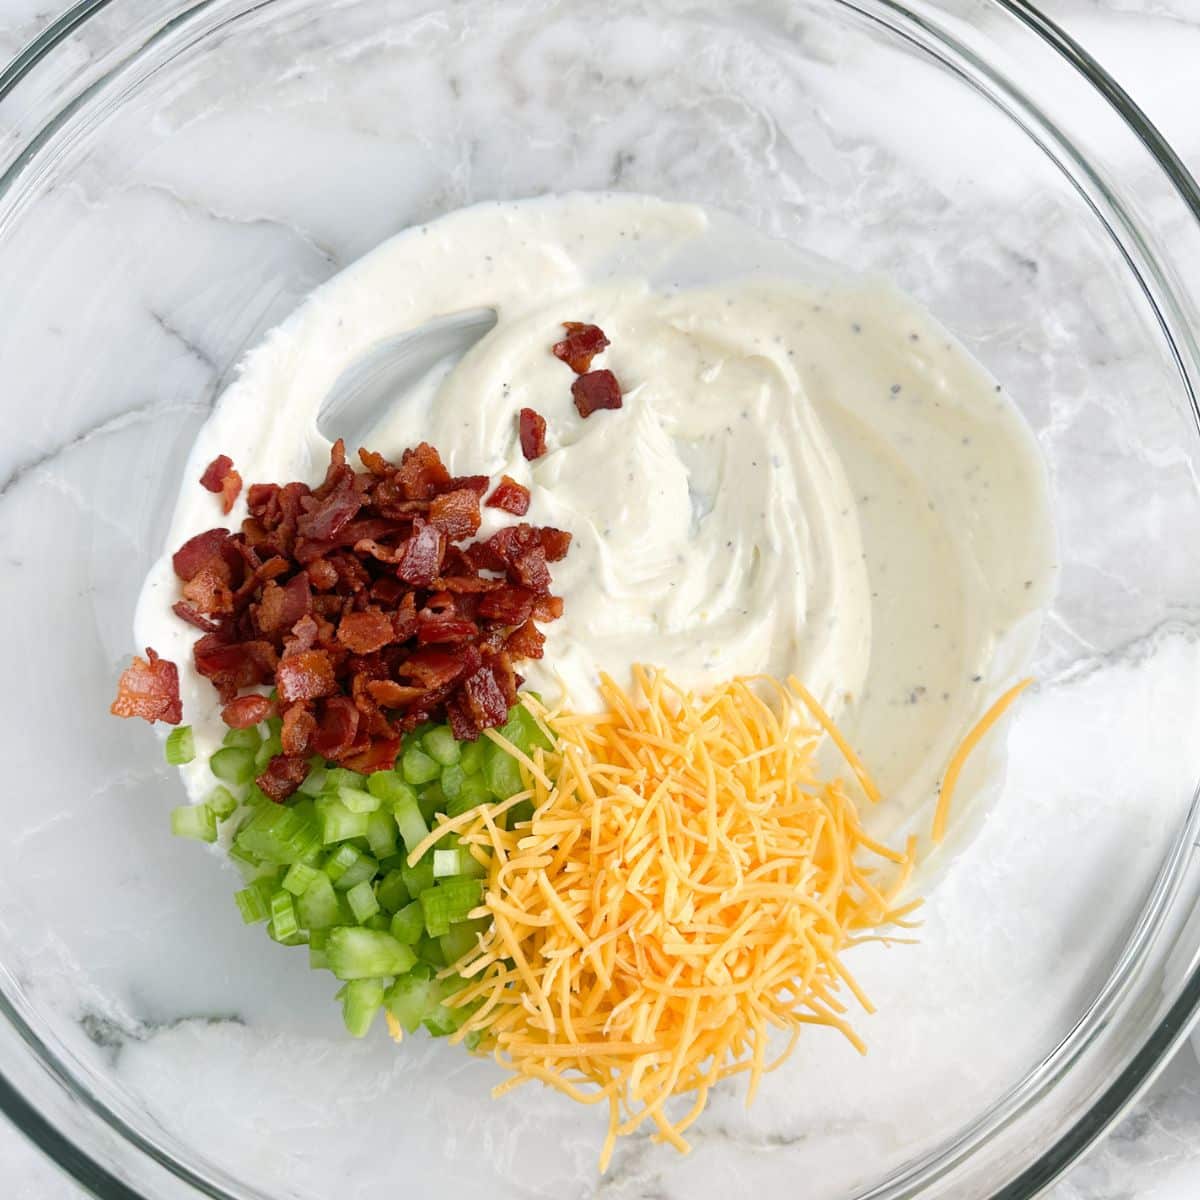 Bowl with mayonnaise, bacon crumbles, celery, and shredded cheese.